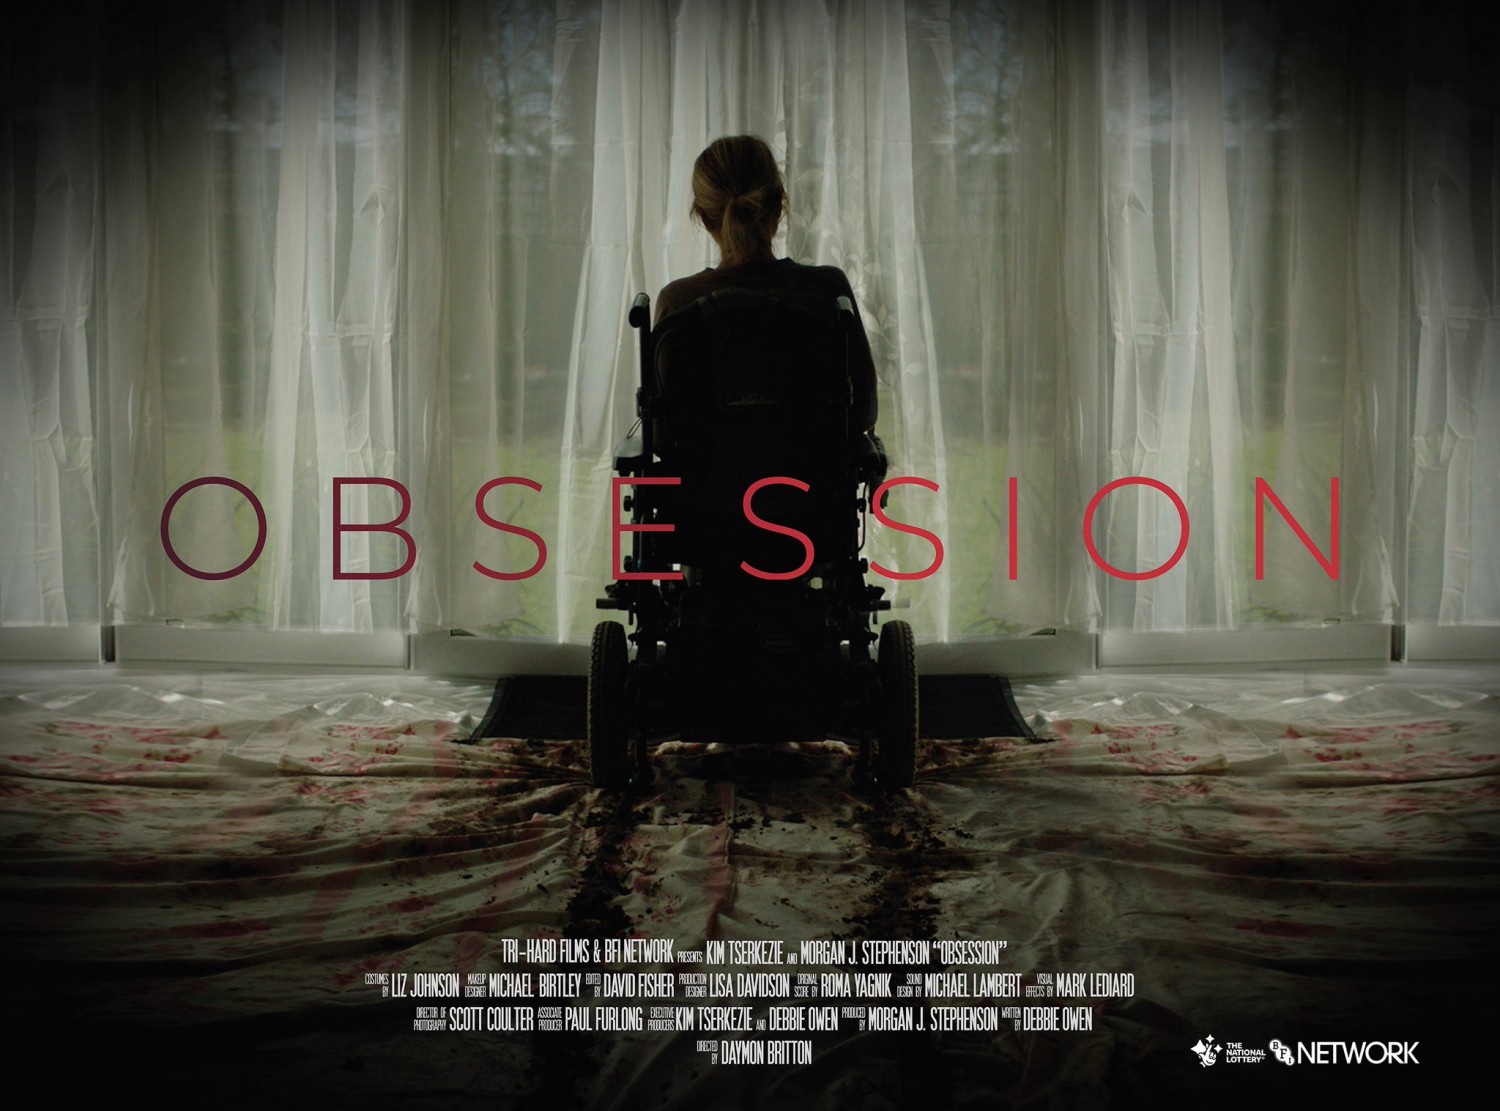 Extra Large Movie Poster Image for Obsession